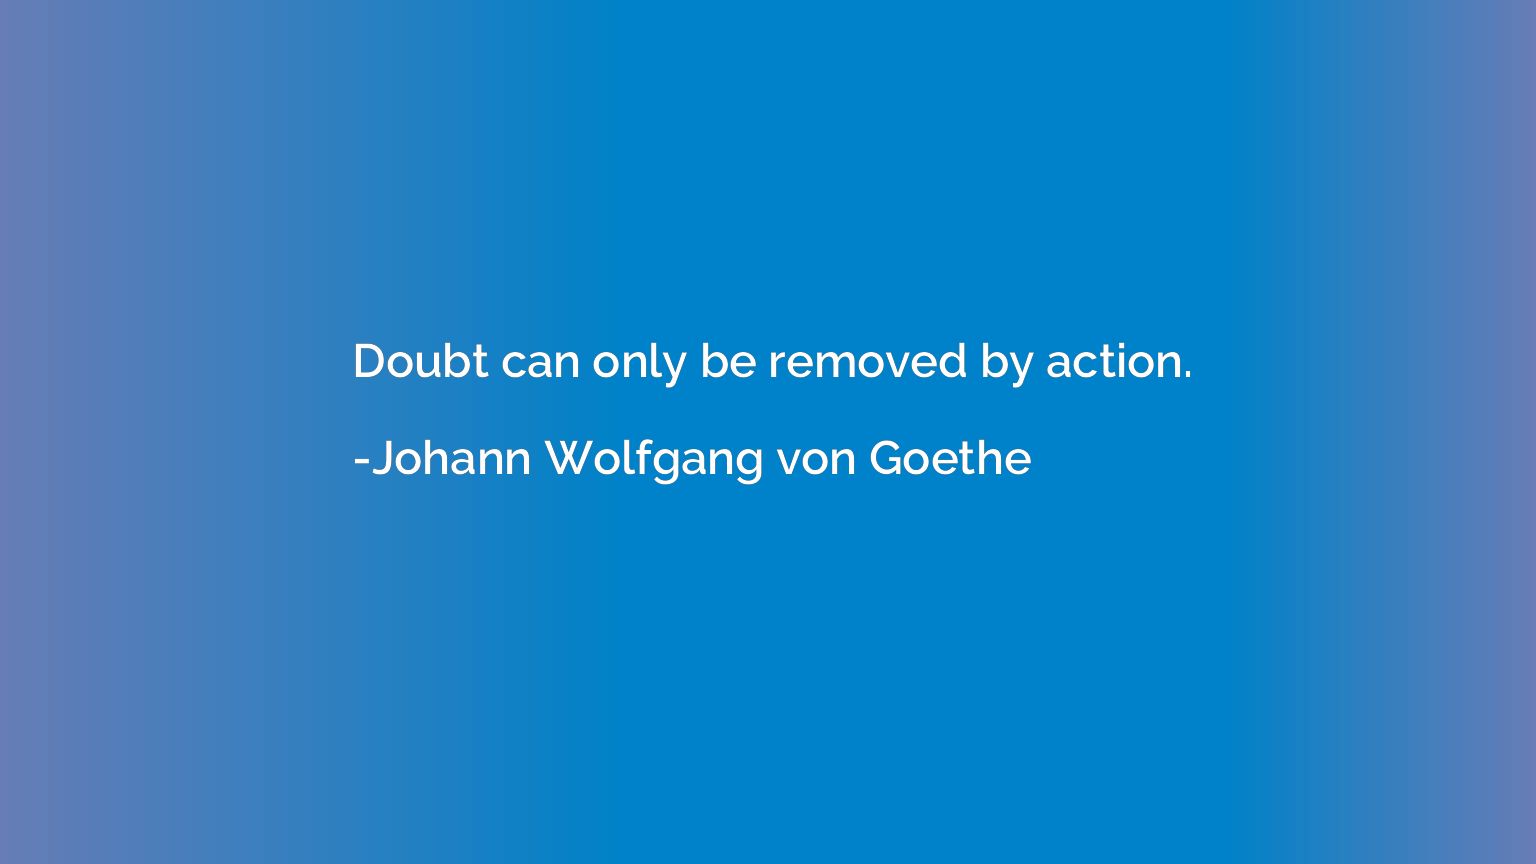 Doubt can only be removed by action.